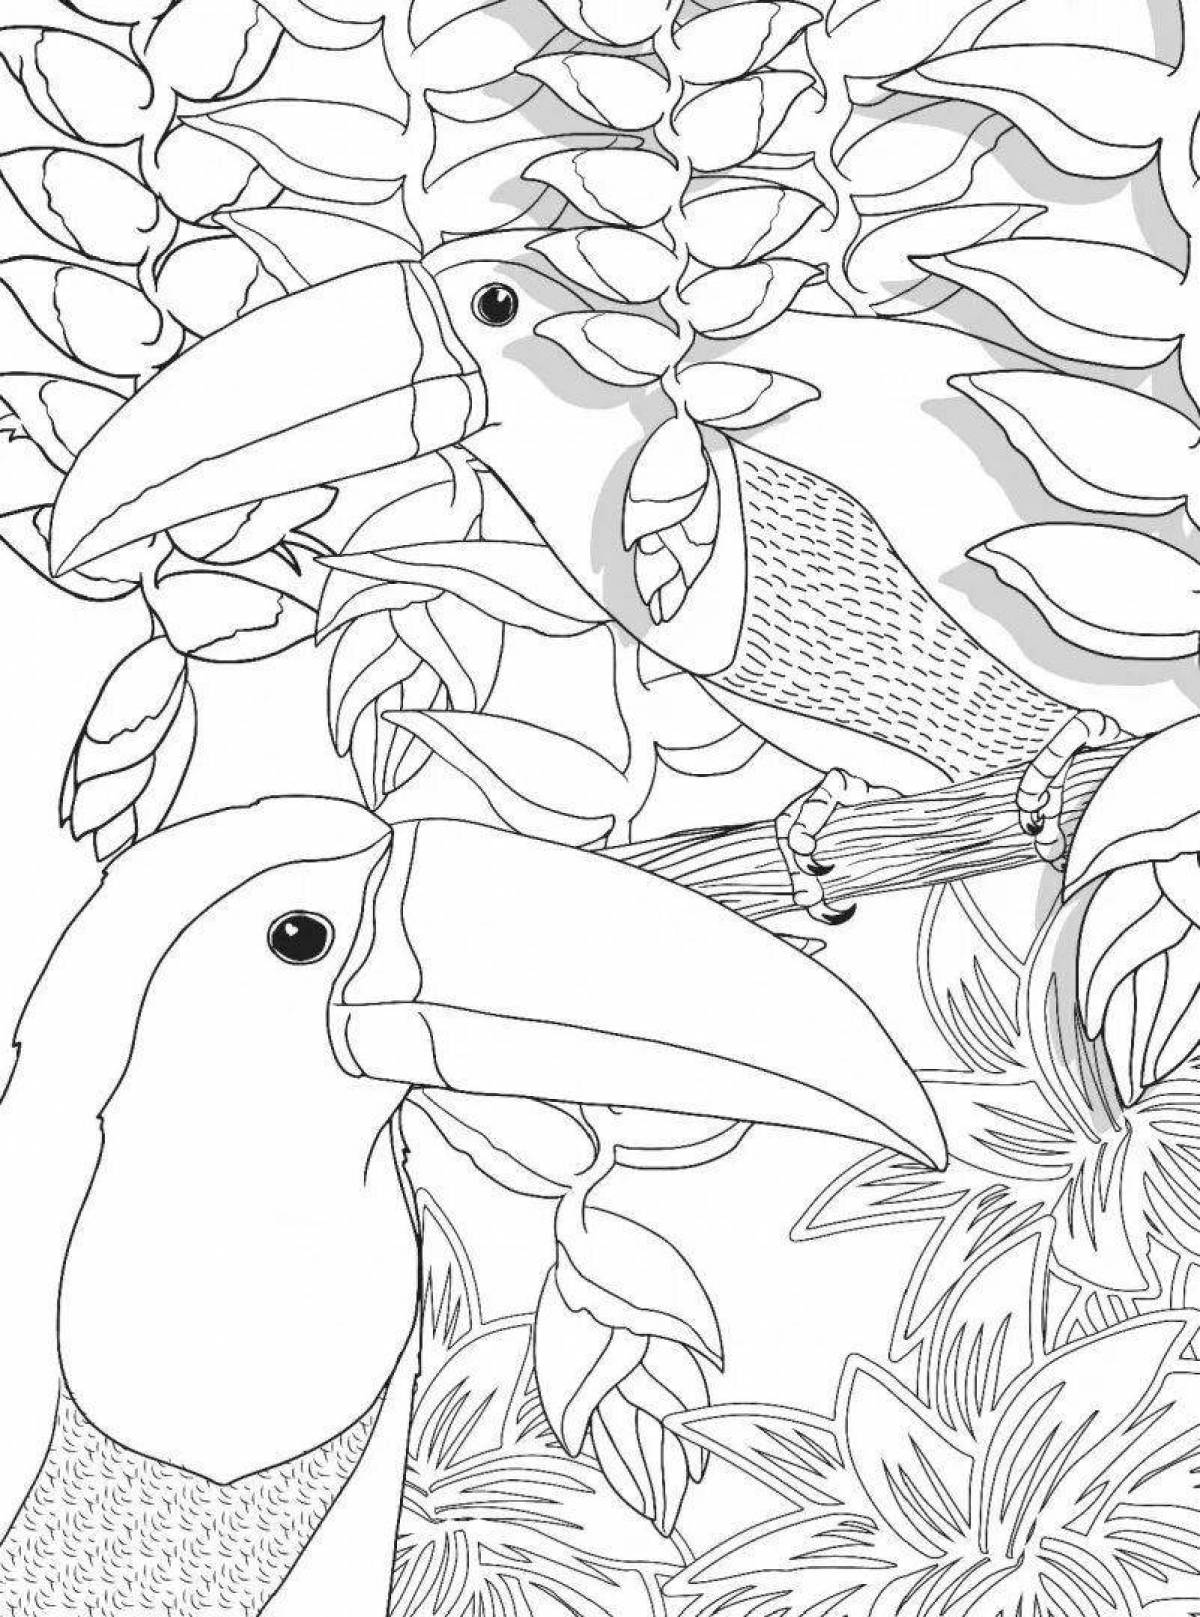 Colorful bird of paradise coloring book